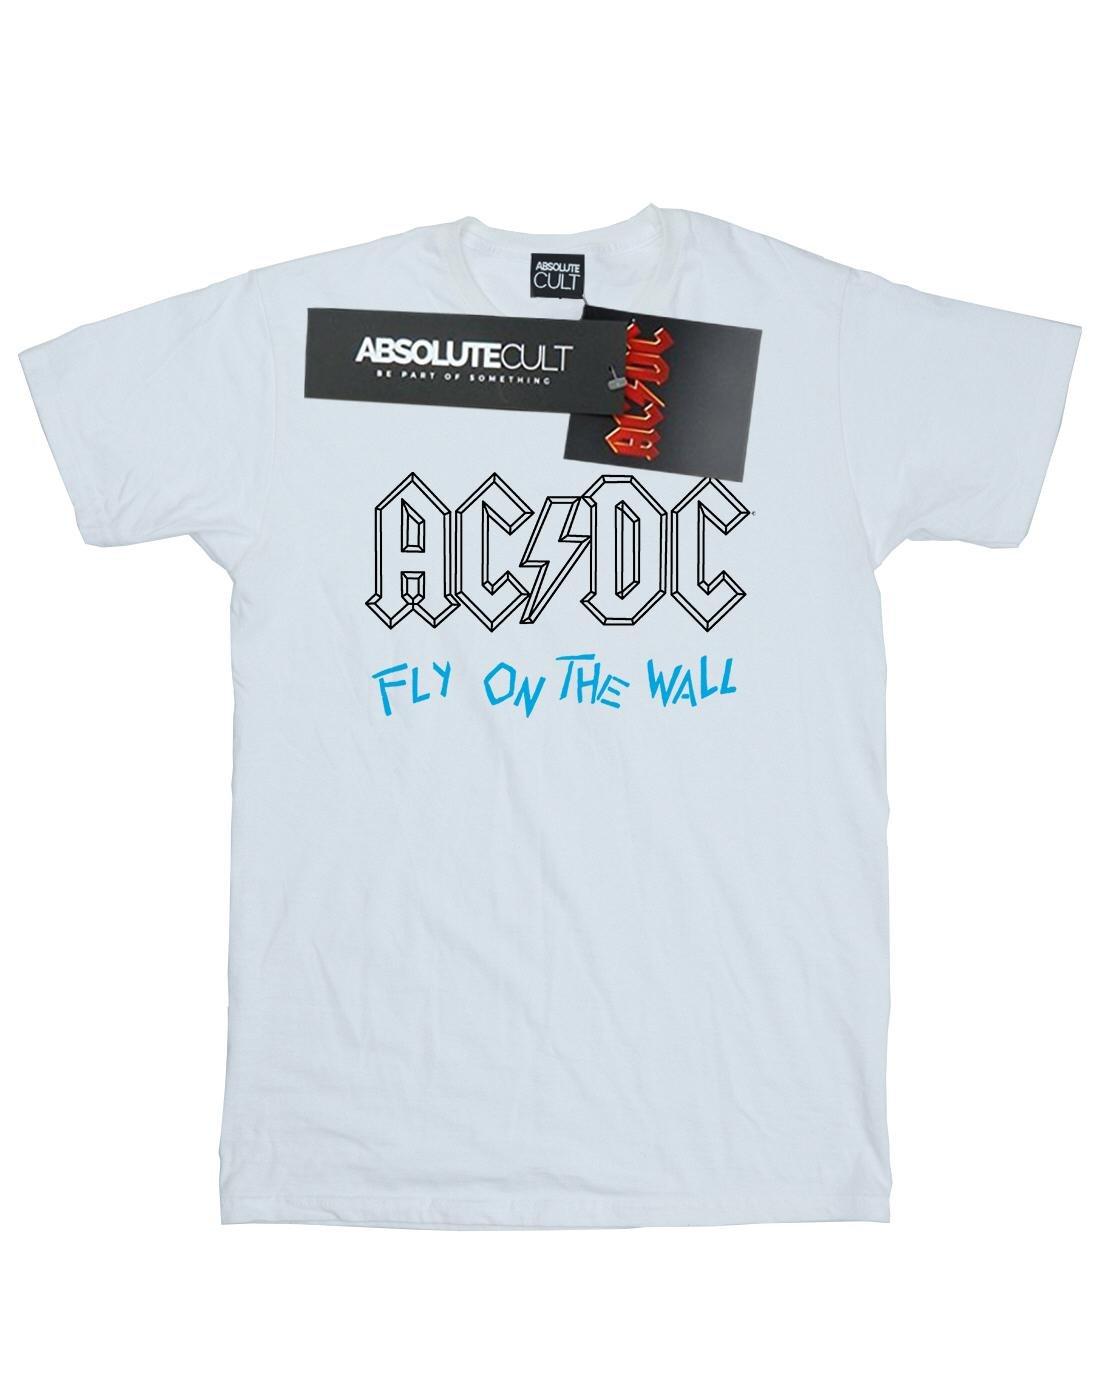 Acdc Fly On The Wall Outline Tshirt Herren Weiss S von AC/DC